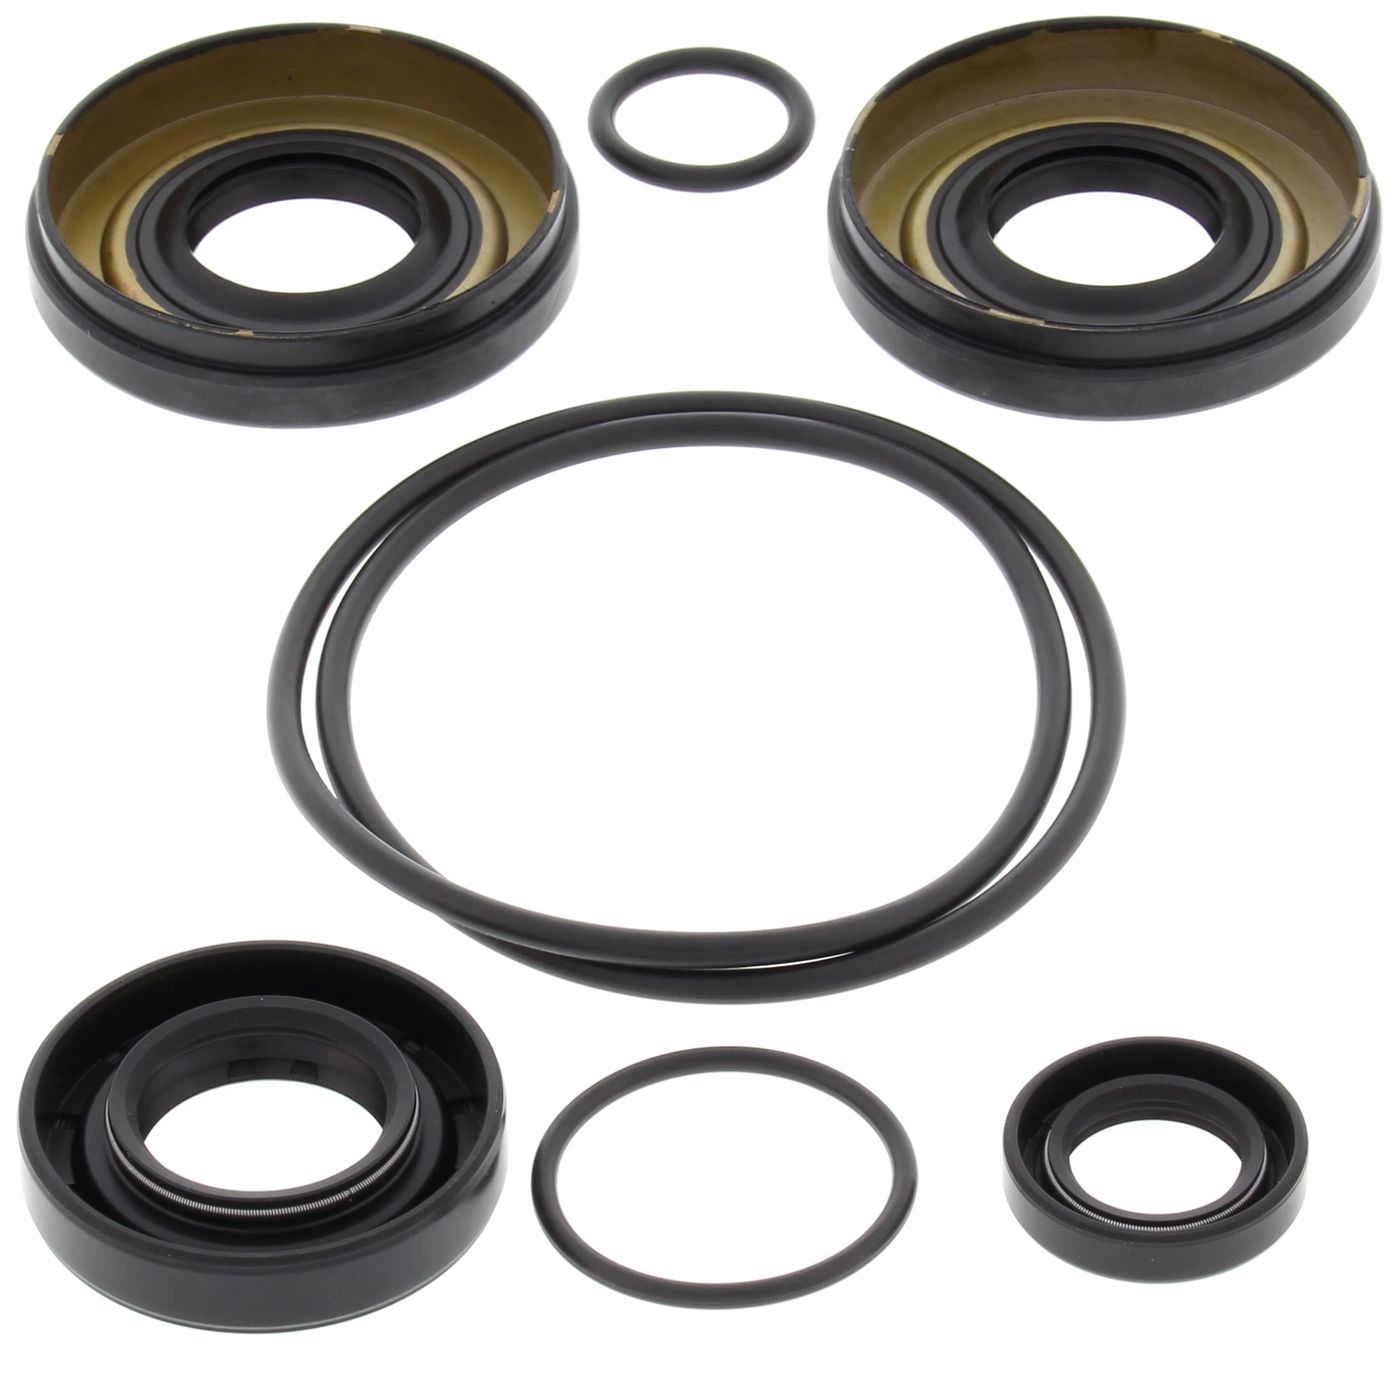 Wrp Diff Seal Kits - WRP252091-5 image